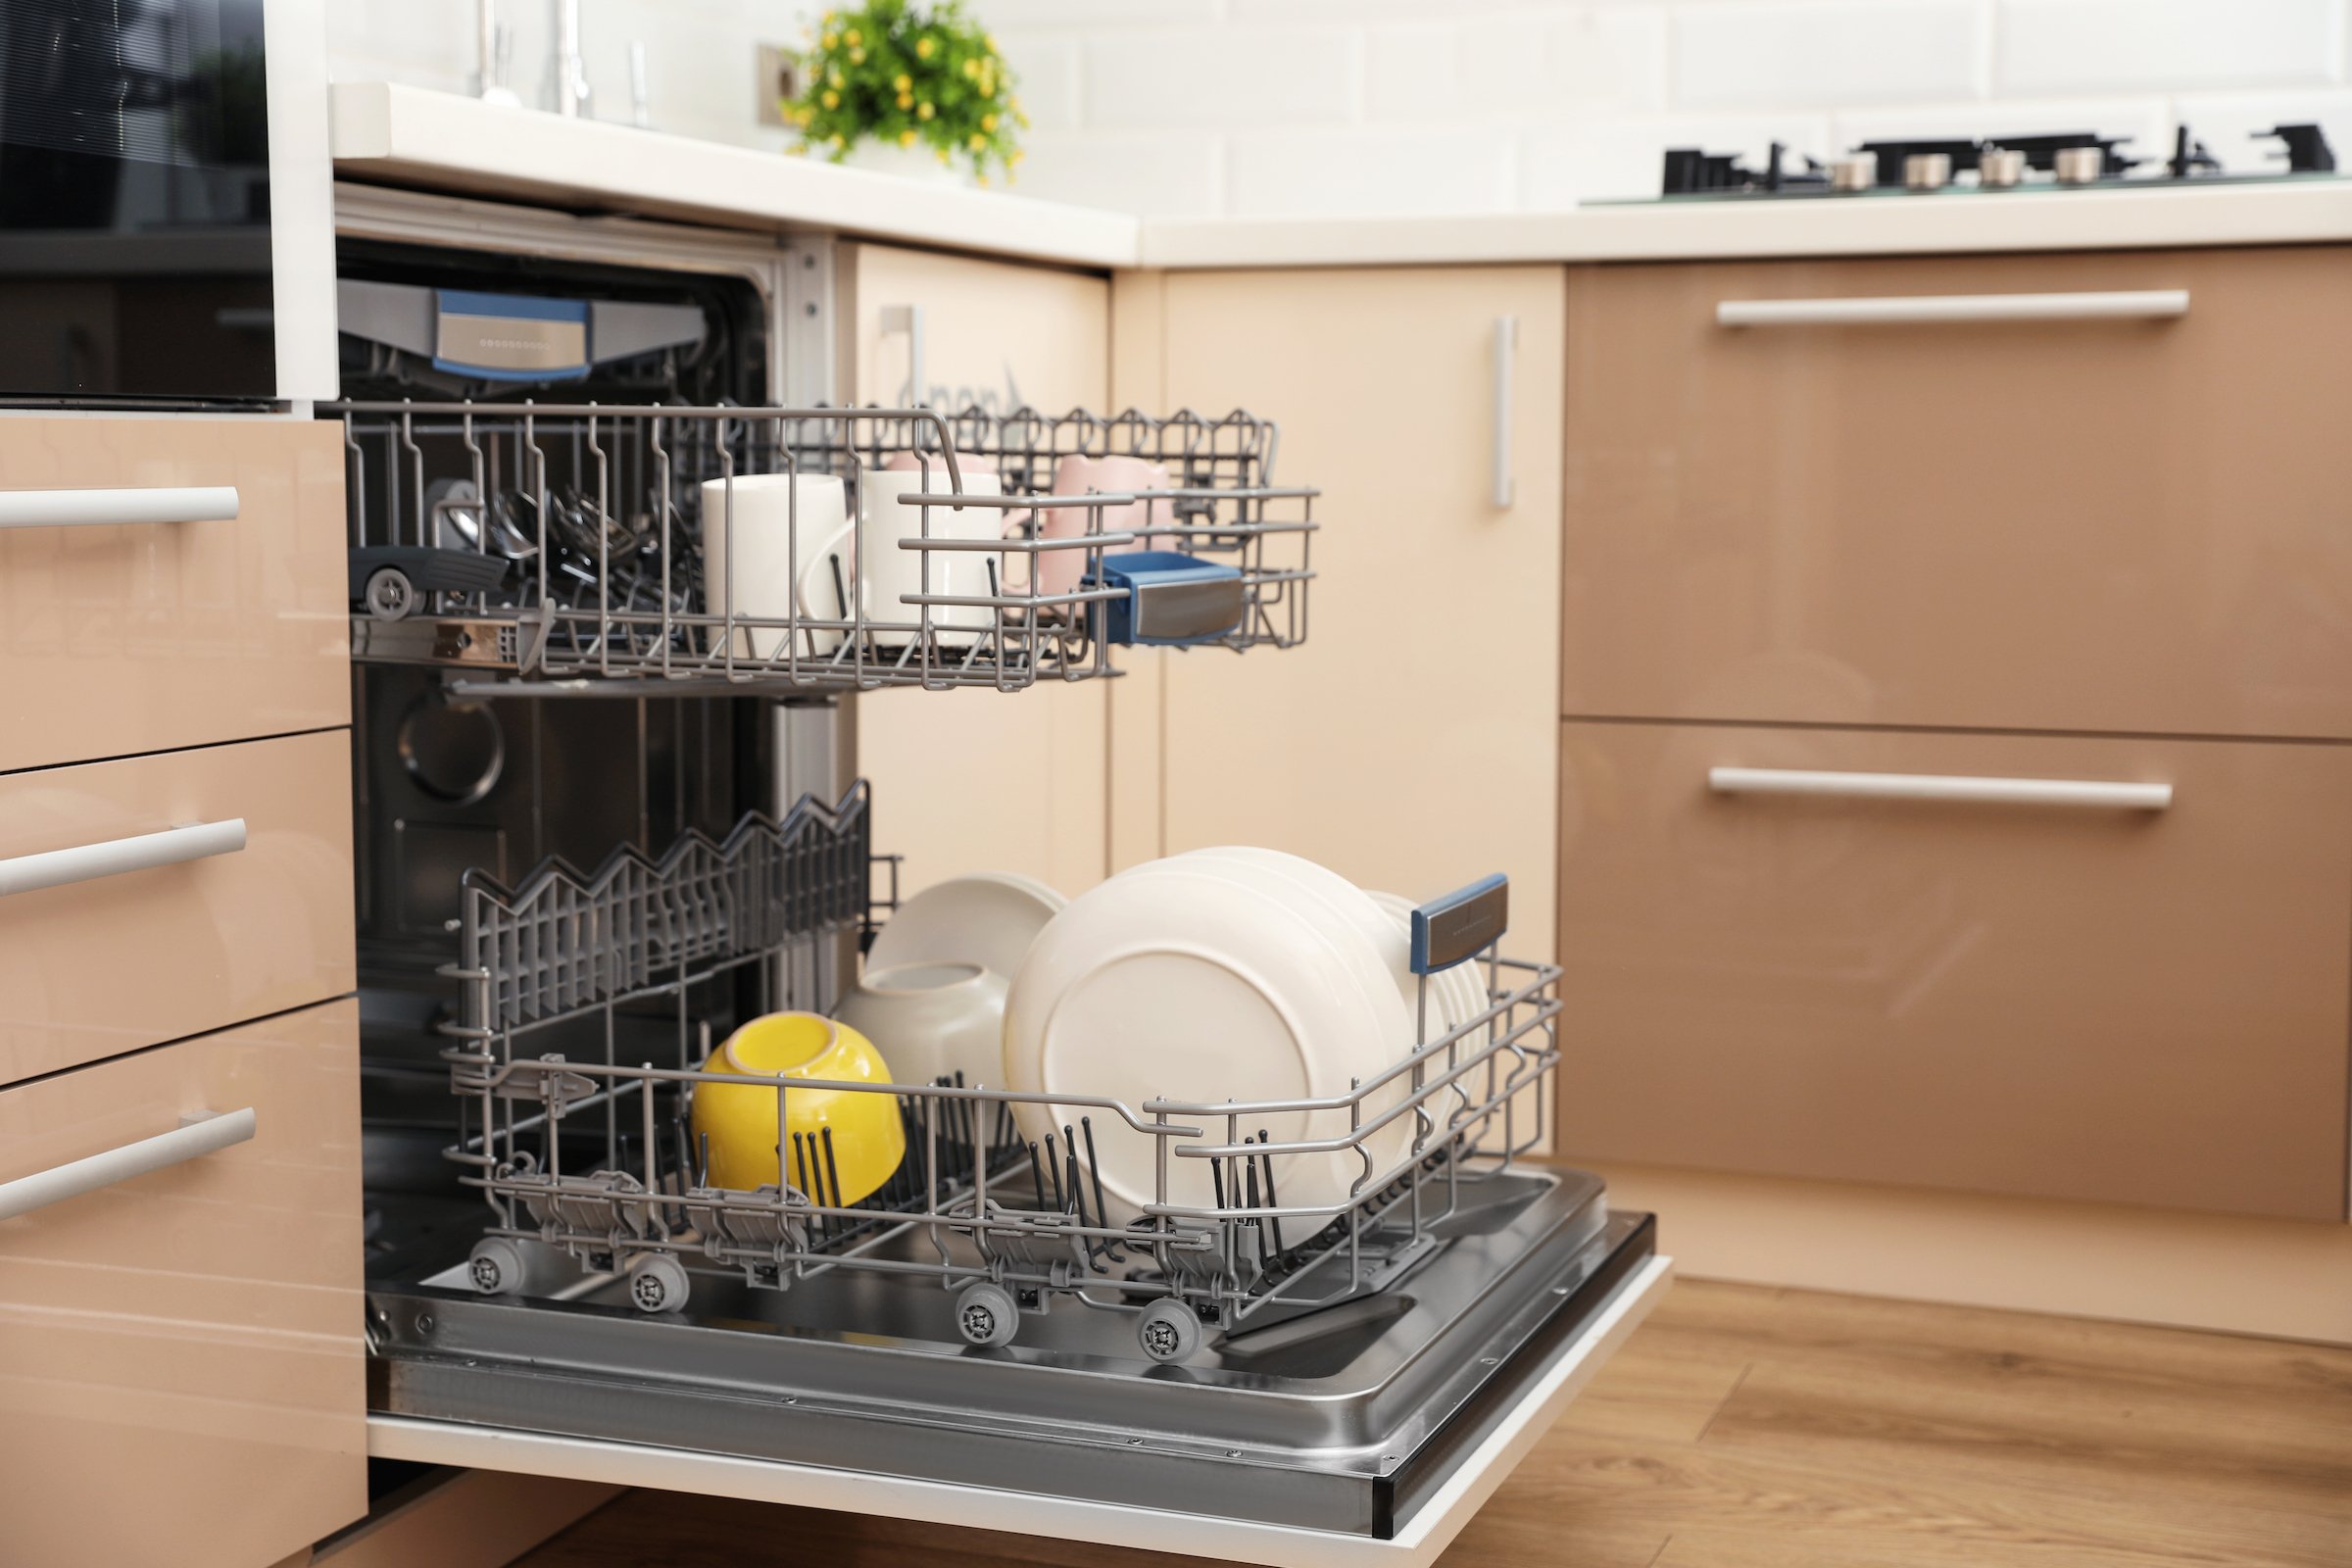 If you can't figure out why your dishwasher takes too long, call in a professional to help.